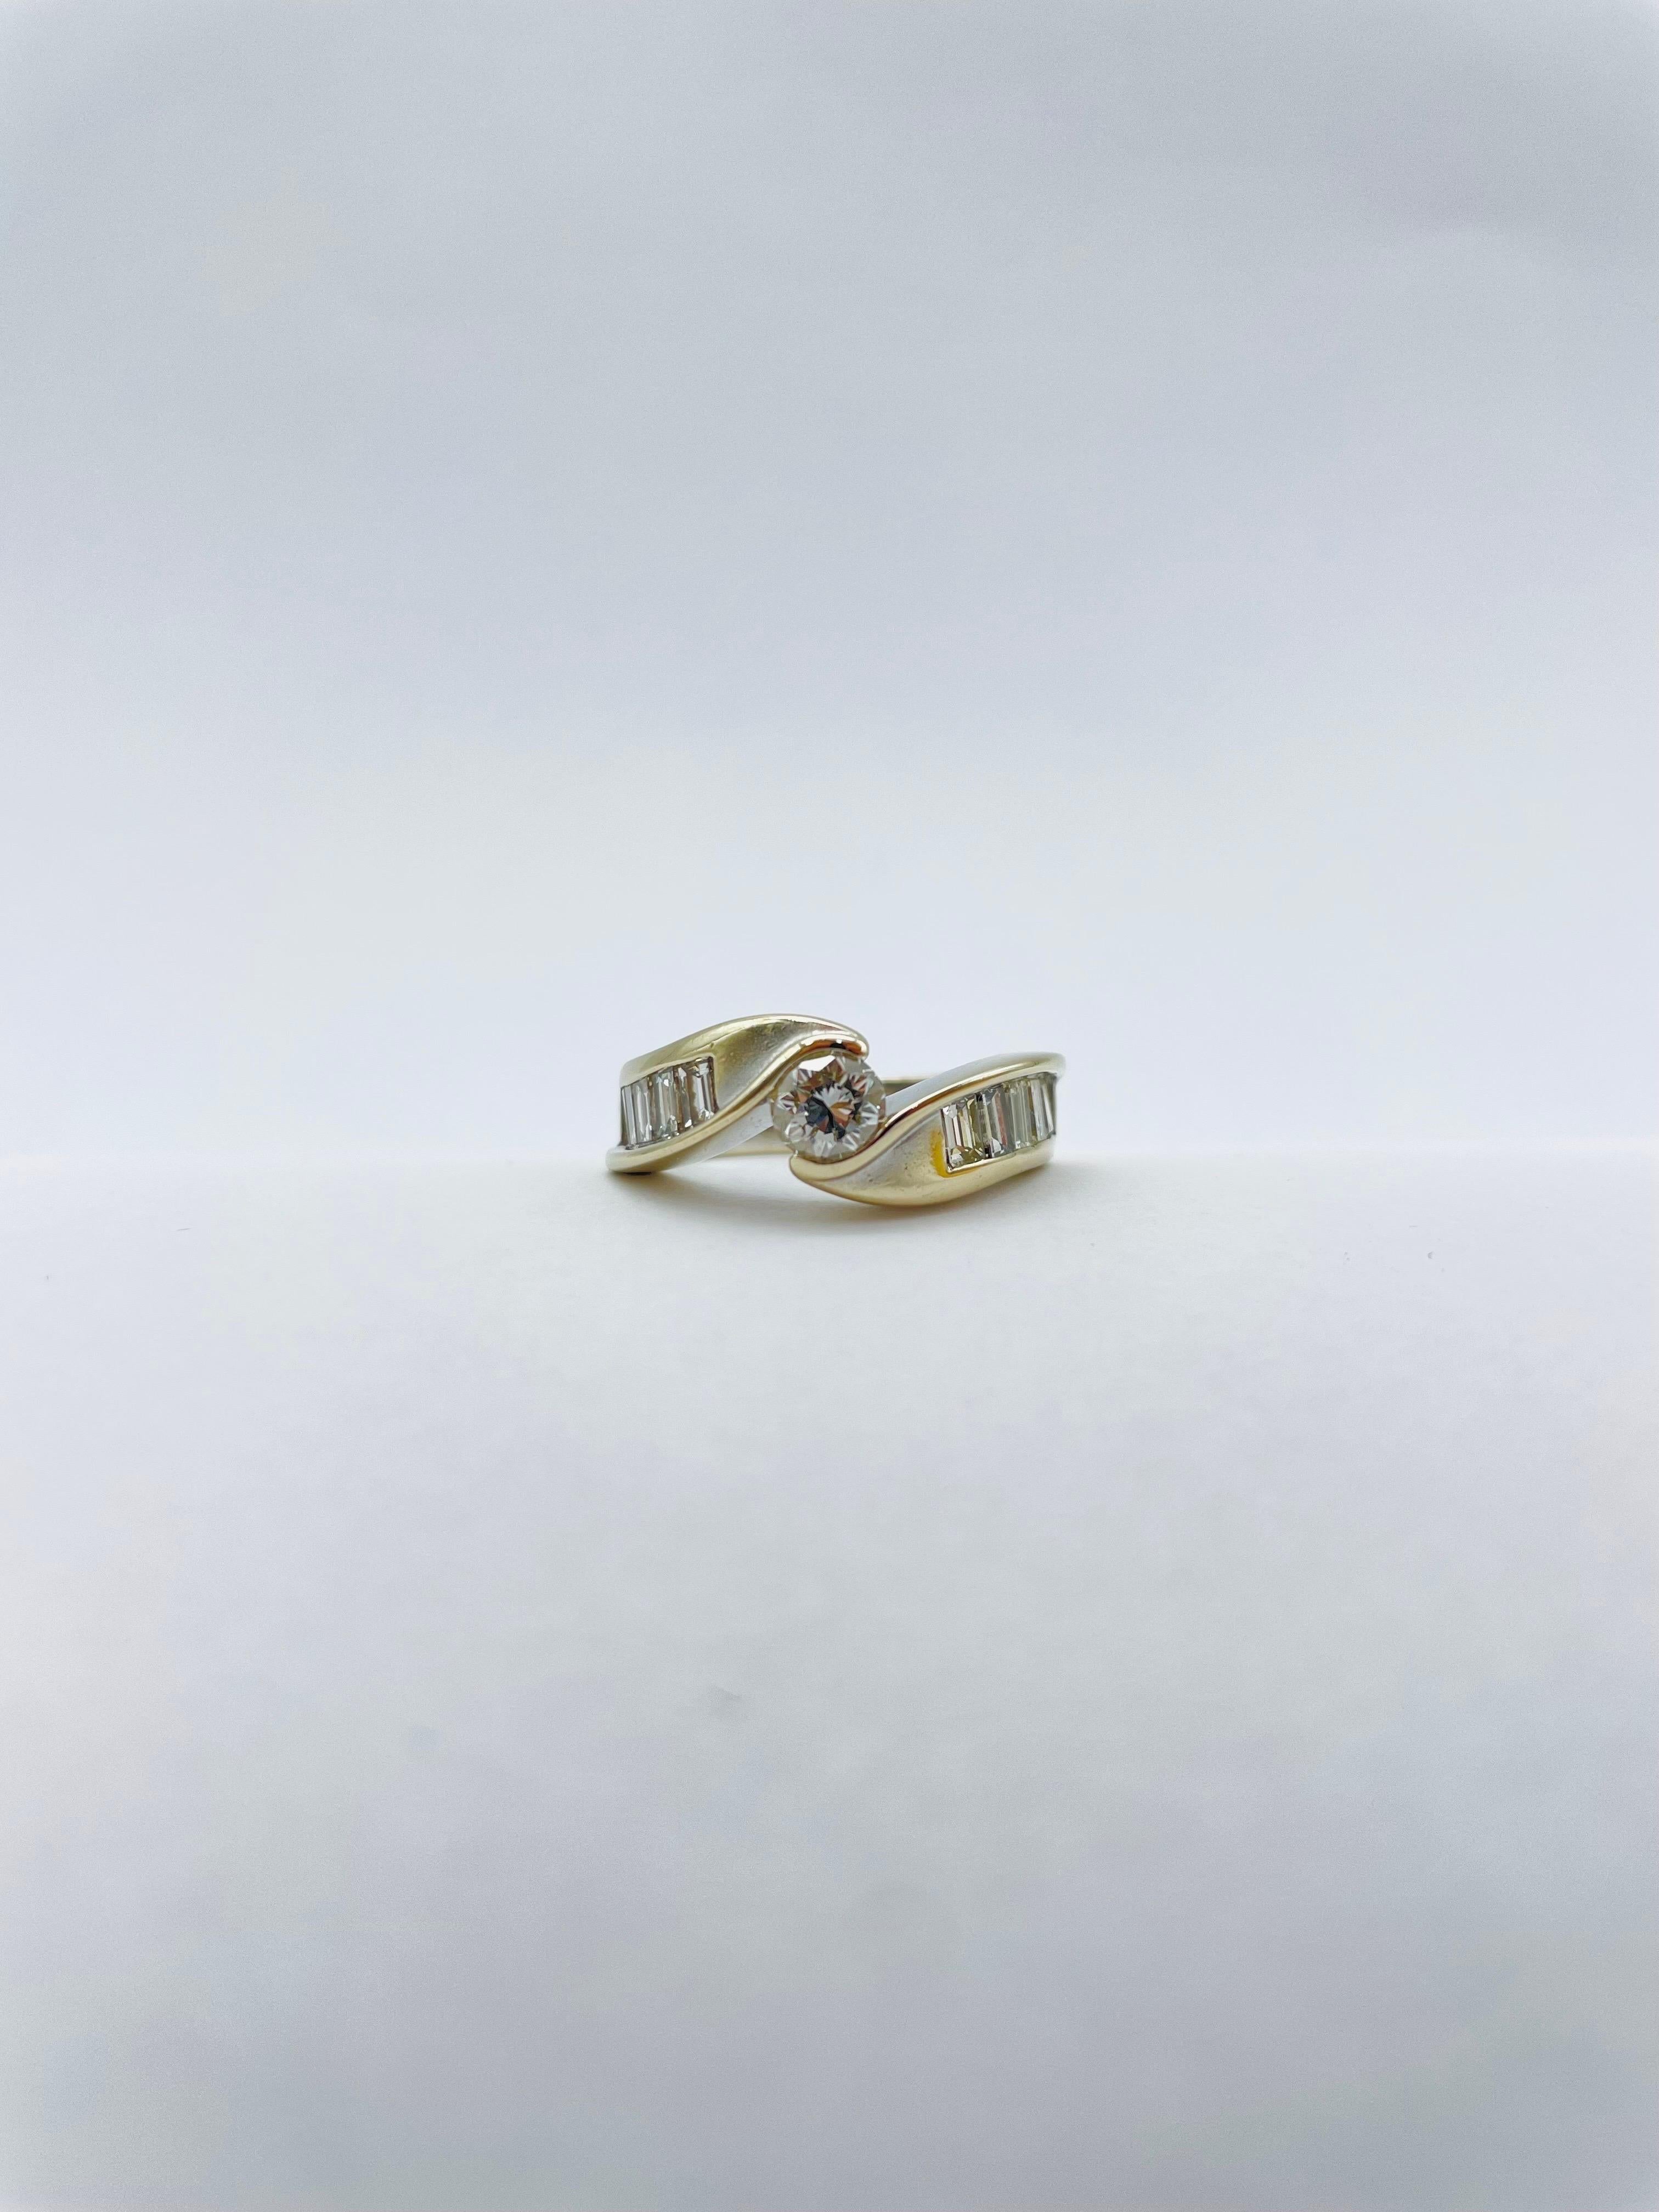 Unique 18k Gold Ring, 0.50 Carat Diamond and 8 Baguette, White/Yellow Gold In Good Condition For Sale In Berlin, BE